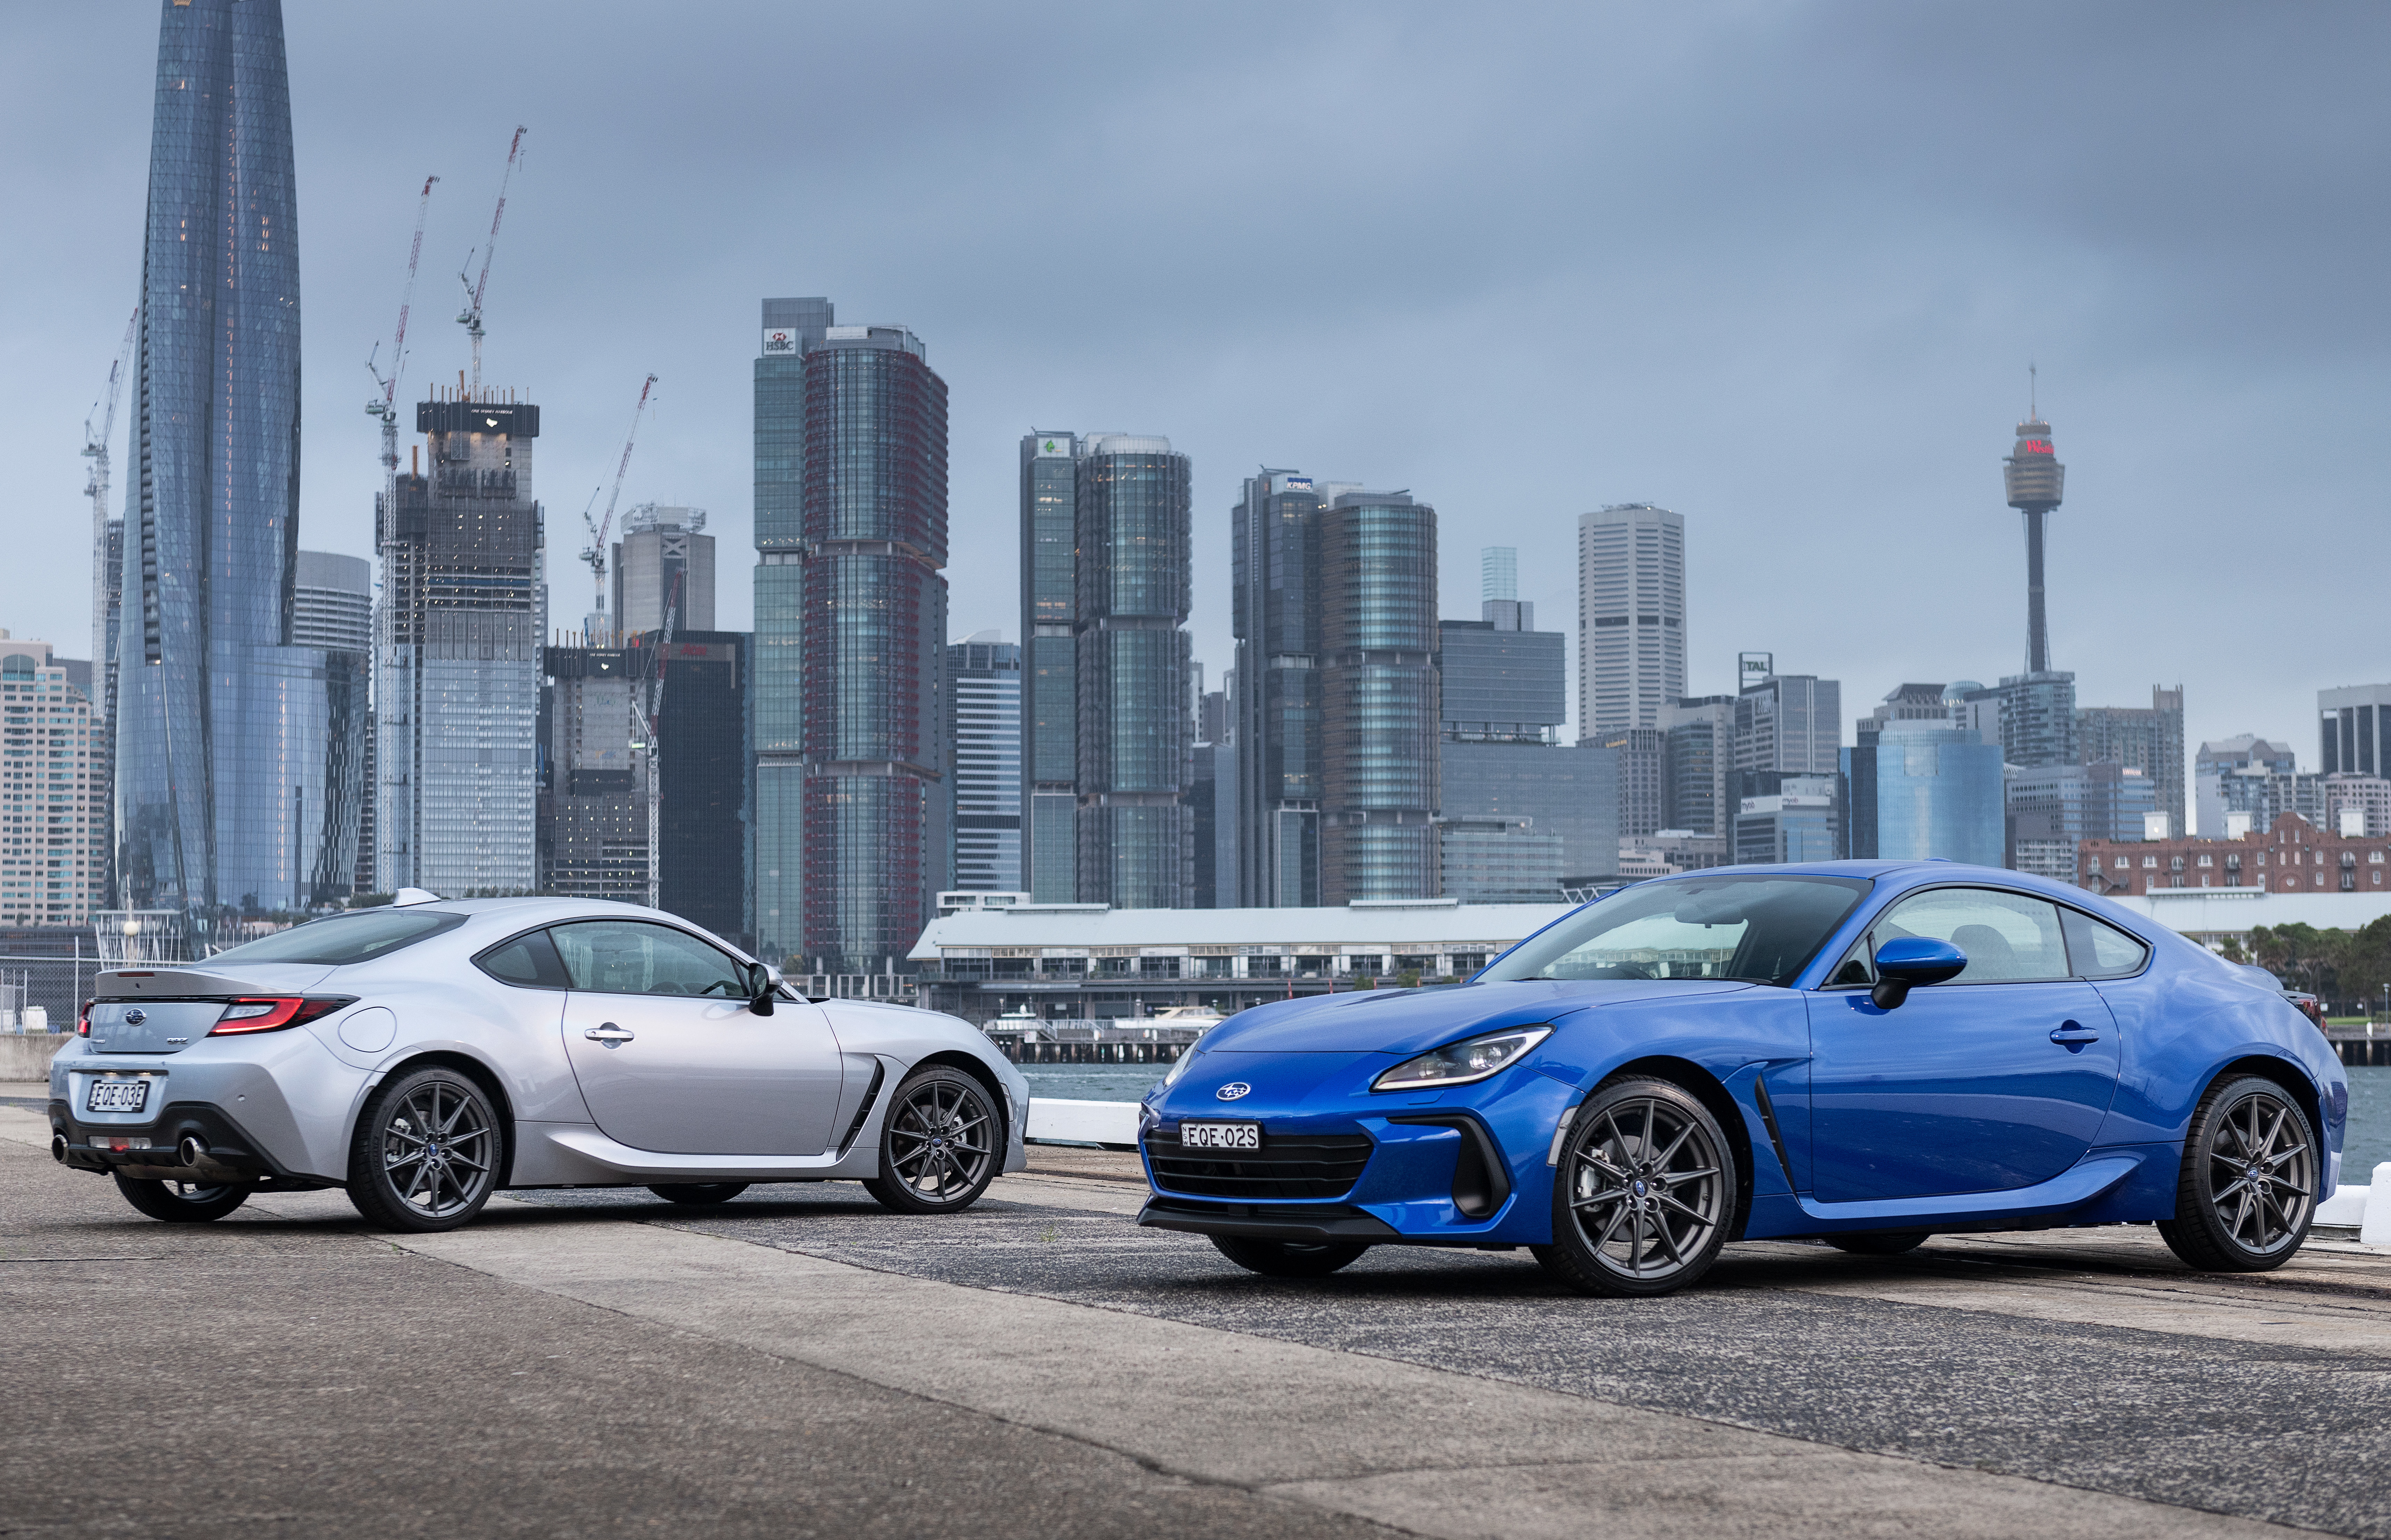 Redesigned and re-engineered: Iconic Subaru BRZ delivers next level exhilaration with new generation 